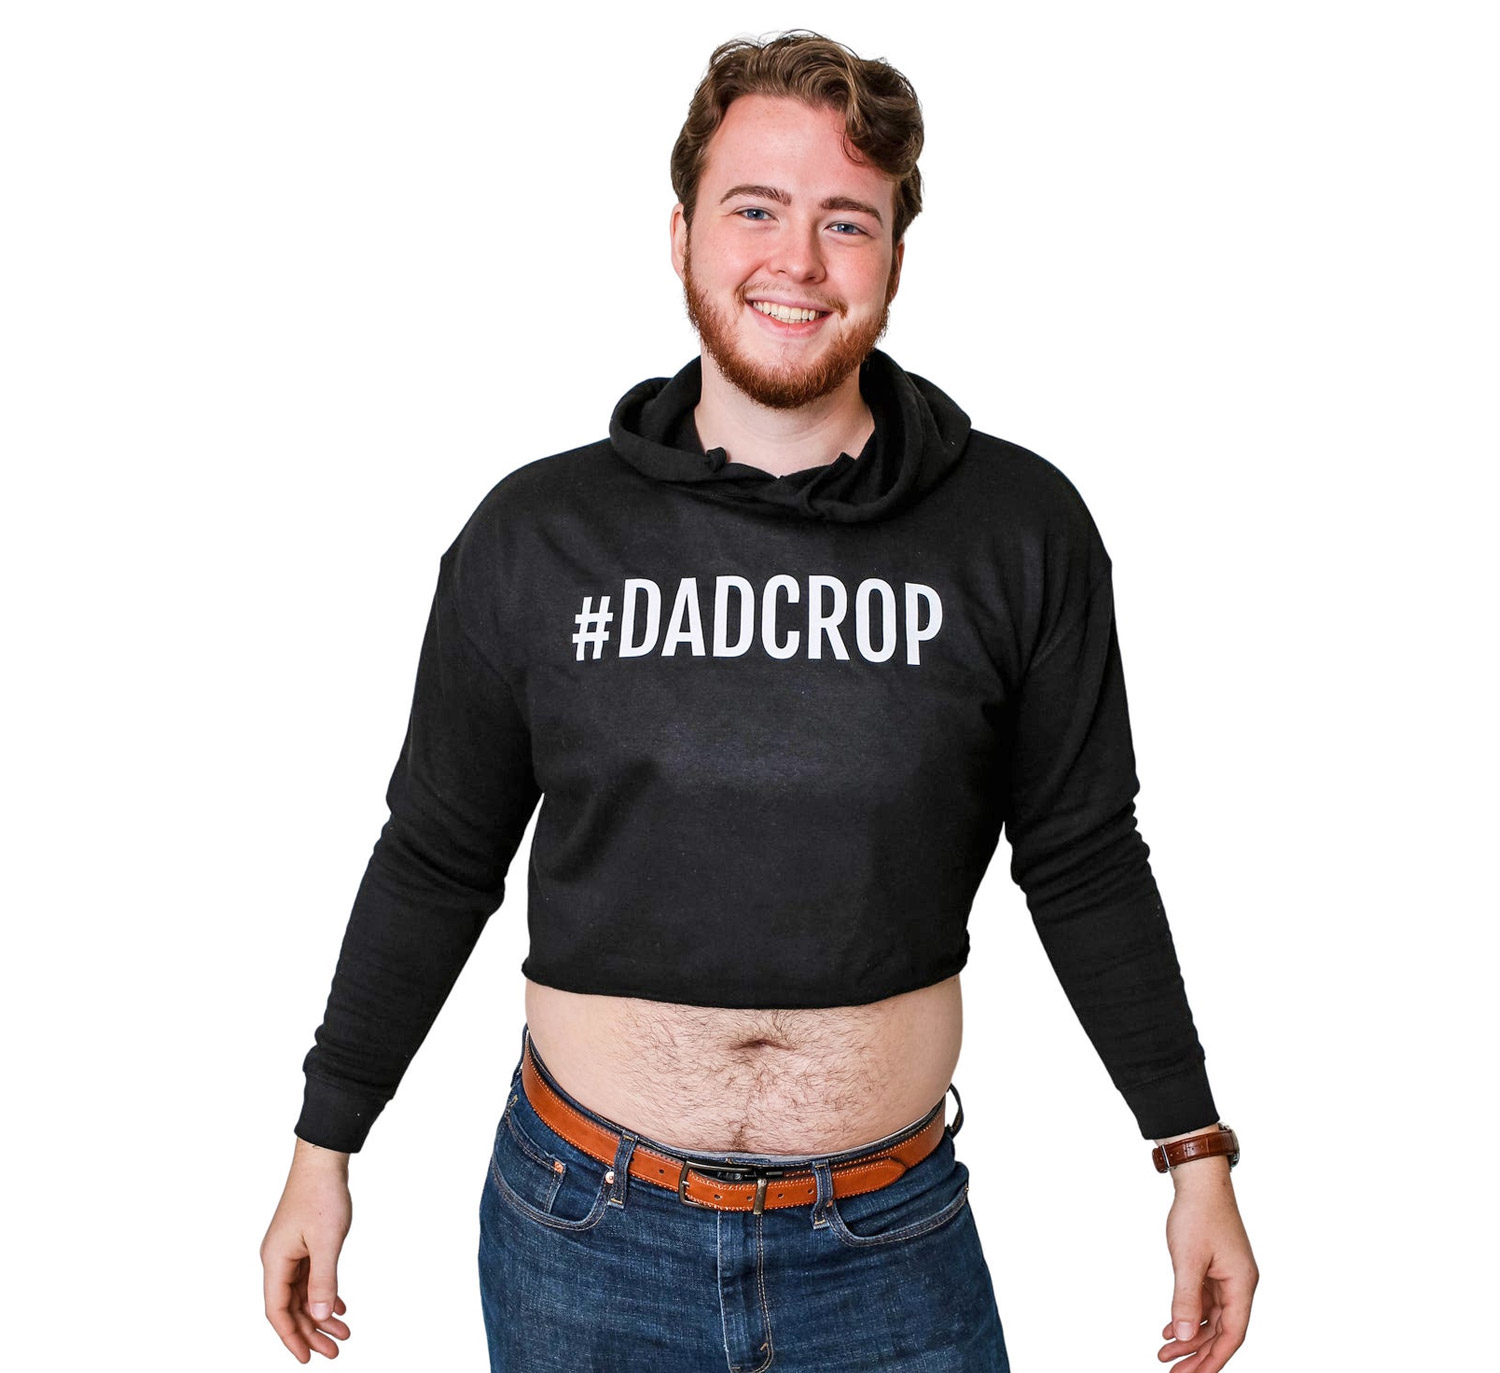 Stylish Dad Bod Crop Top - Weird gifts for dad